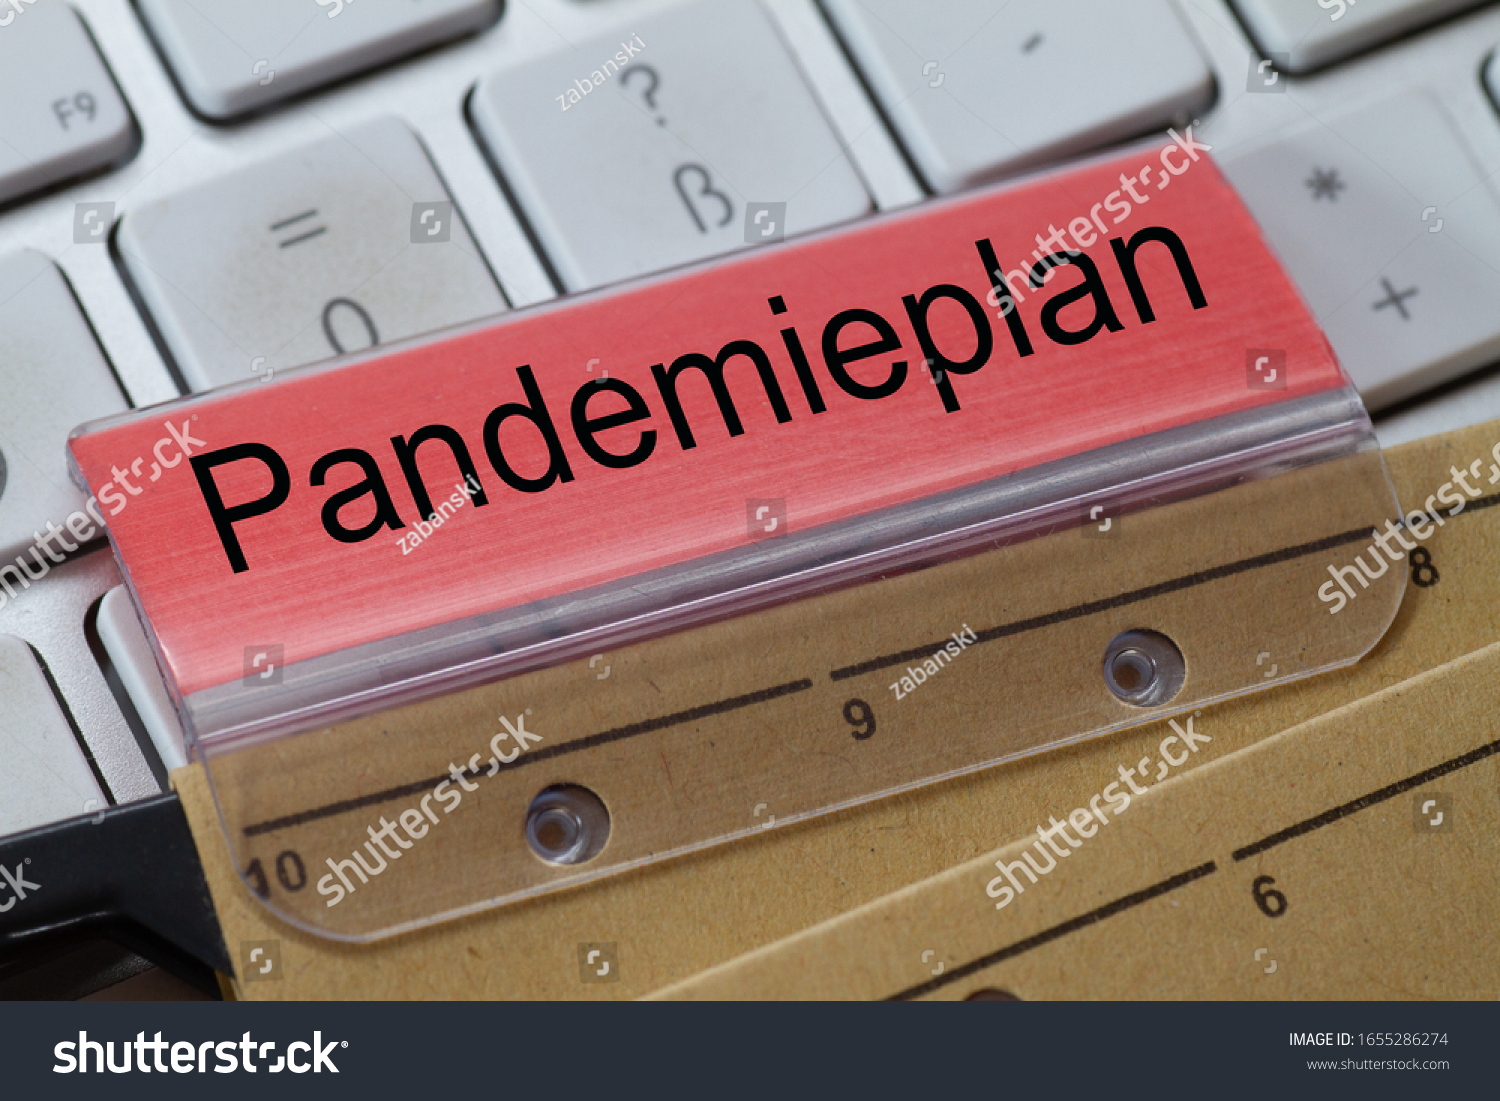 The German word for pandemic plan can be seen on the label of a brown hanging folder. The hanging folder is on a computer keyboard. #1655286274